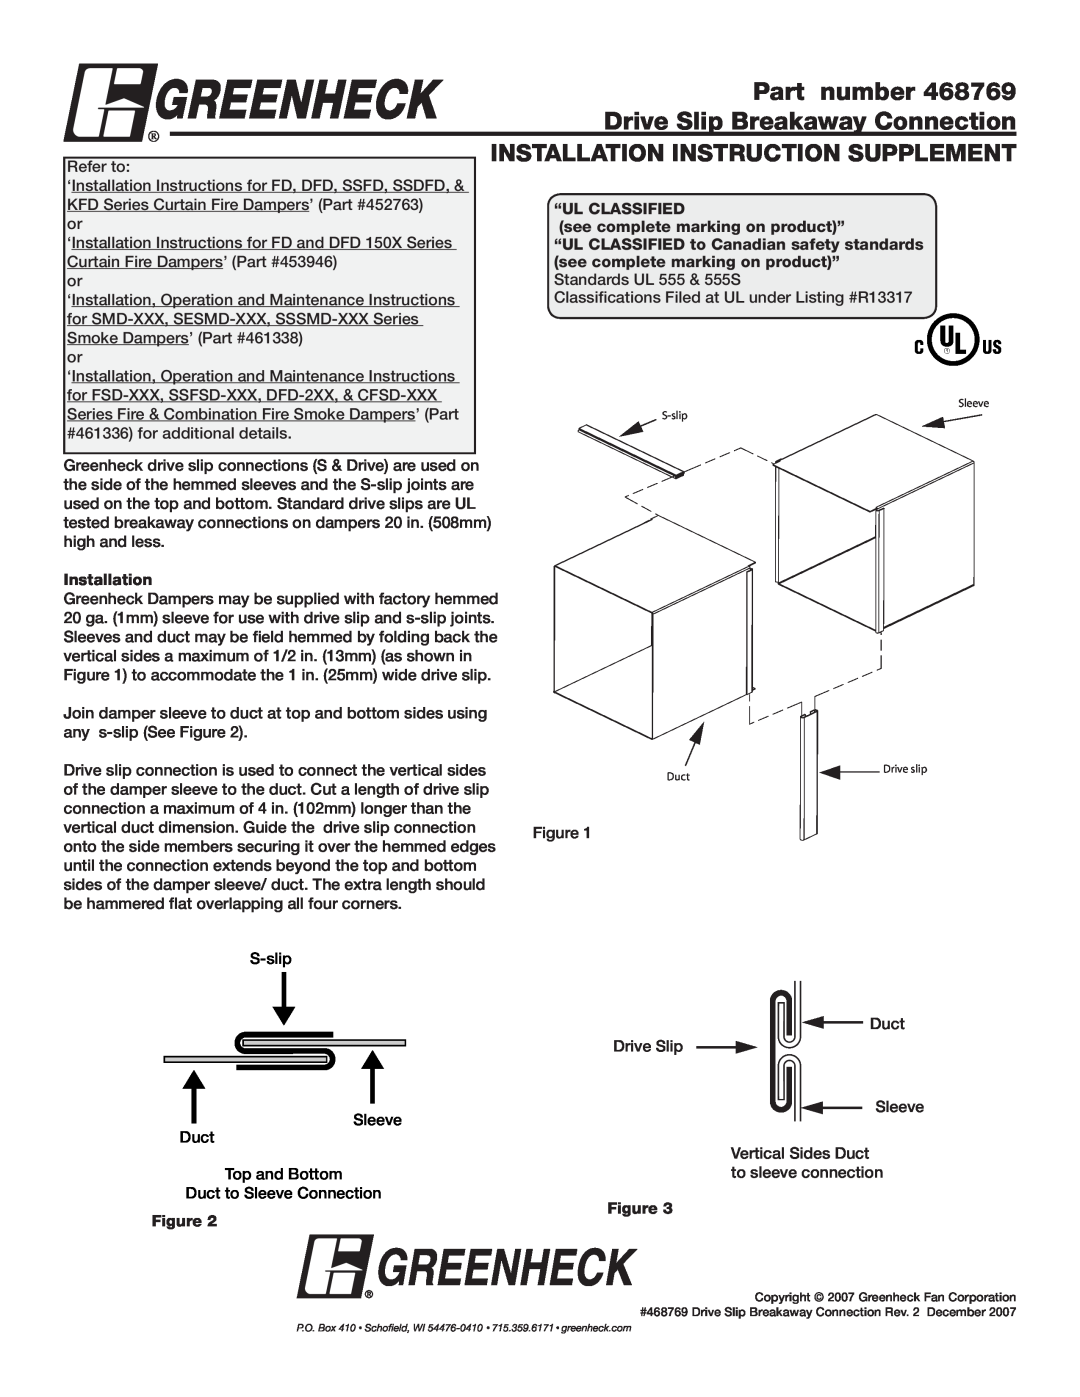 Greenheck Fan 468769 installation instructions Part number, Drive Slip Breakaway Connection, “Ul Classified, Installation 